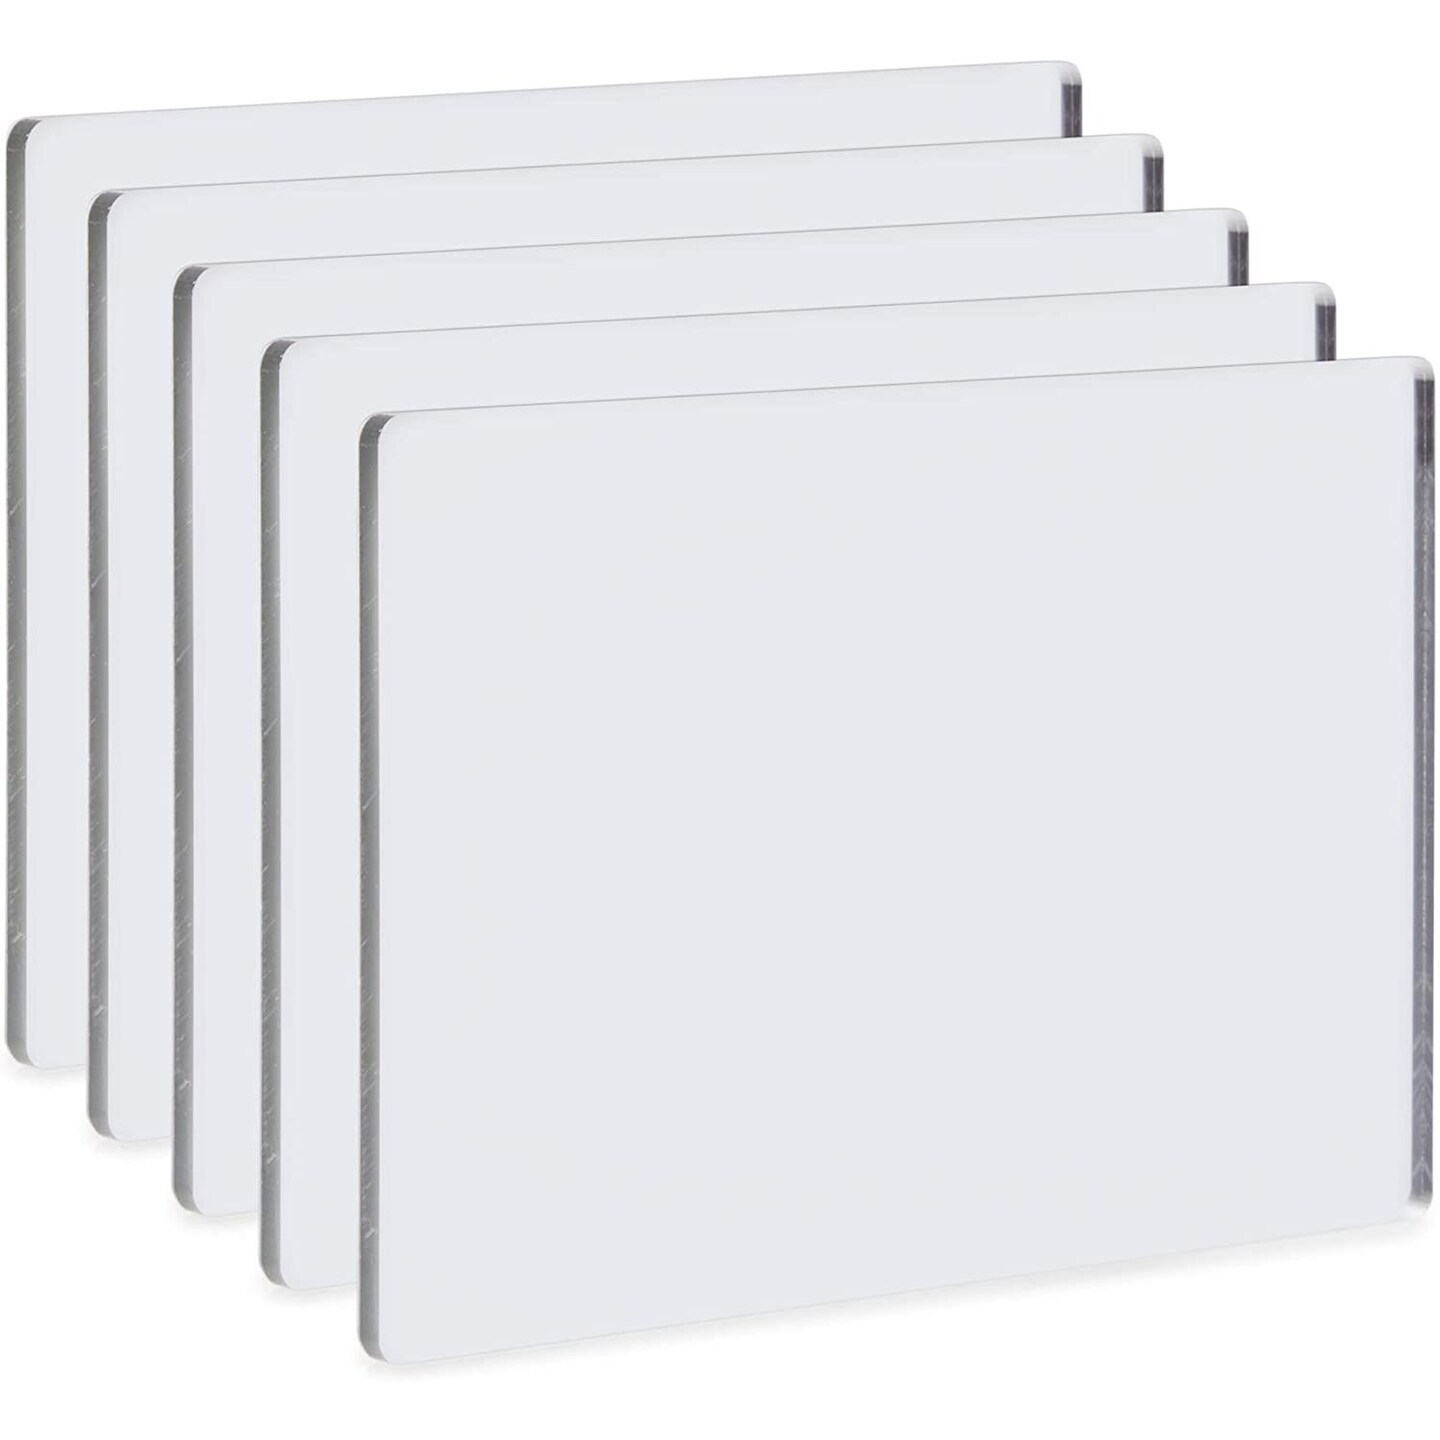 10 Pack Flexible Mirror Sheets Decorative Self Adhesive Mirror Tiles, 8x10  Inch